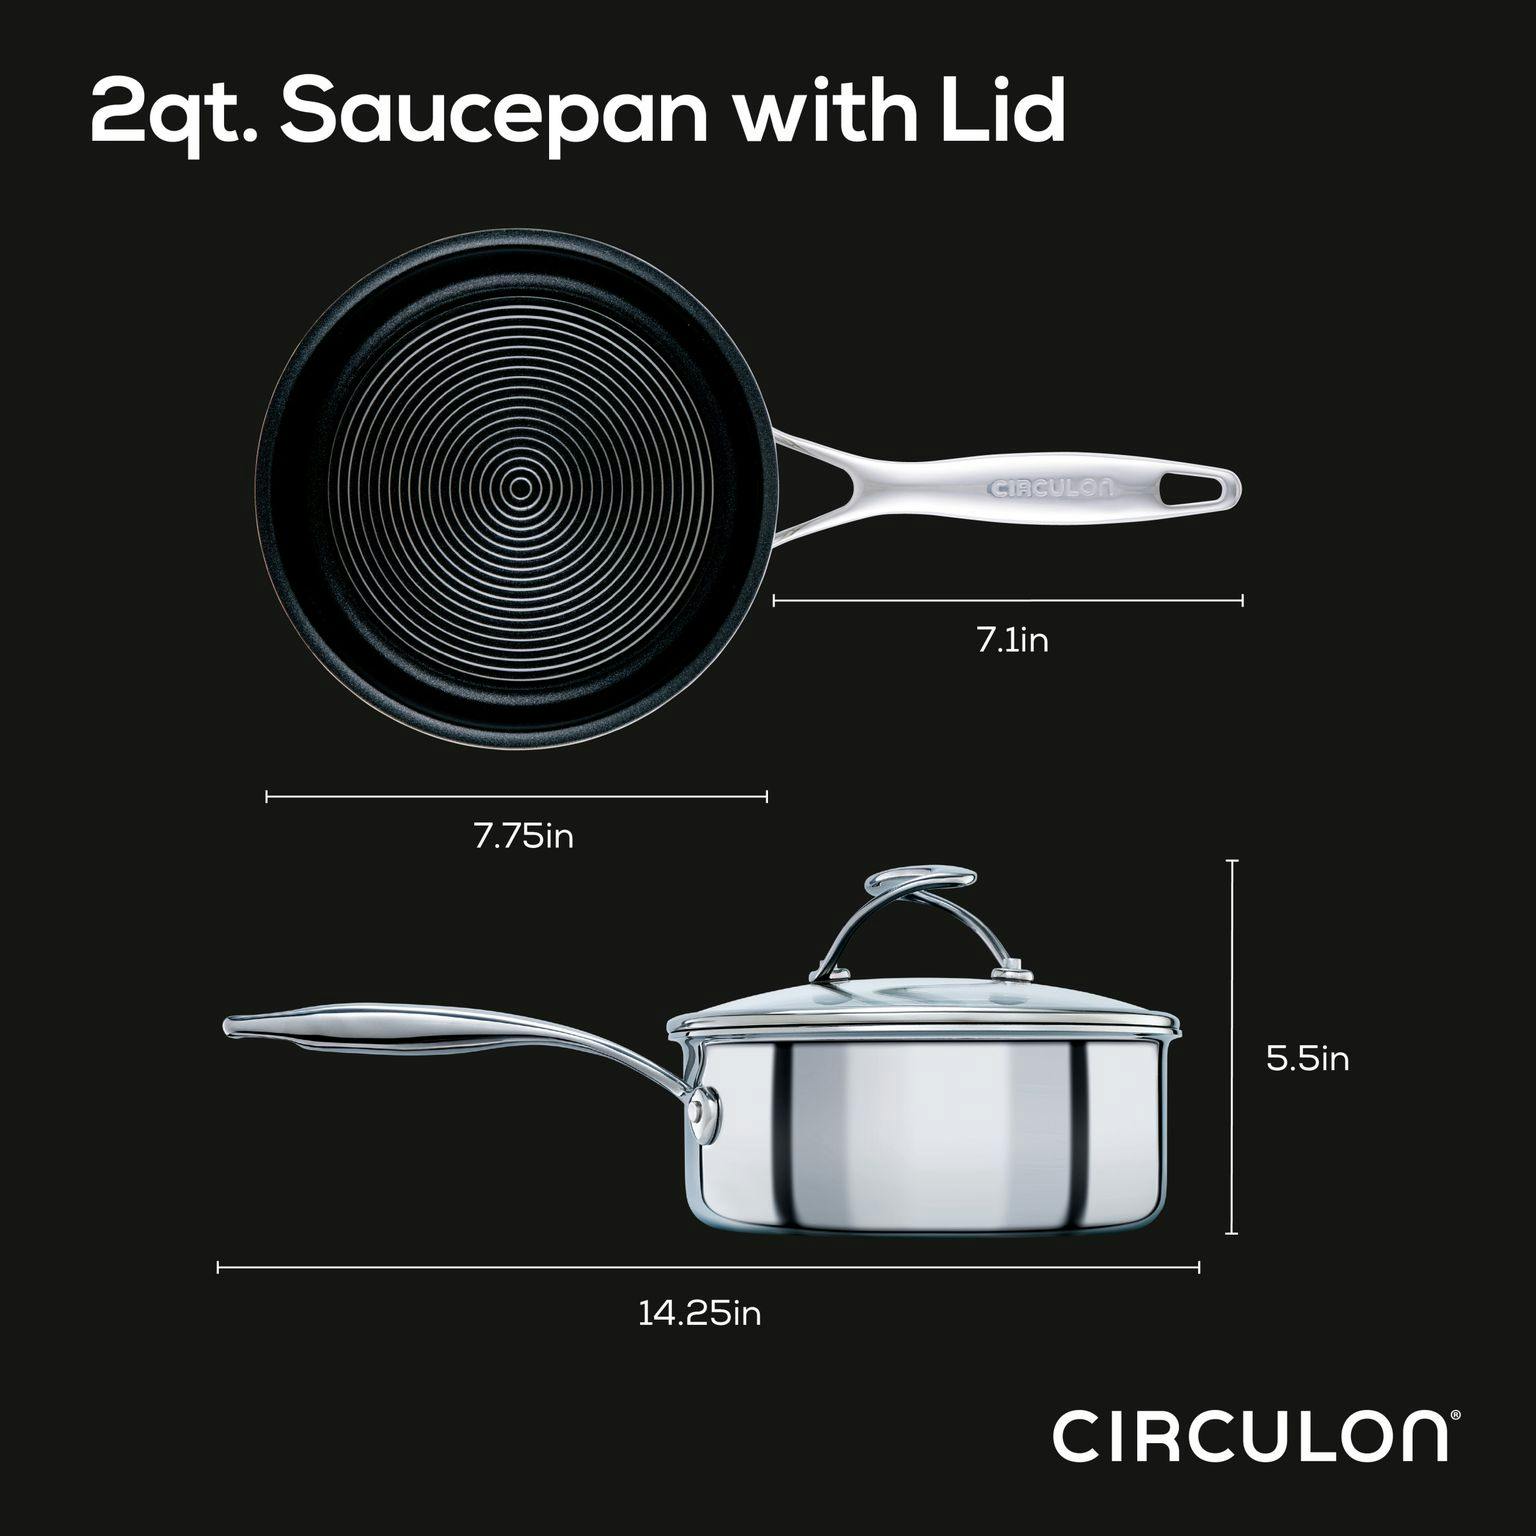 Circulon Clad Stainless Steel Induction Saucepan with Glass Lid and Hybrid SteelShield and Nonstick Technology, 2-Quart, Silver